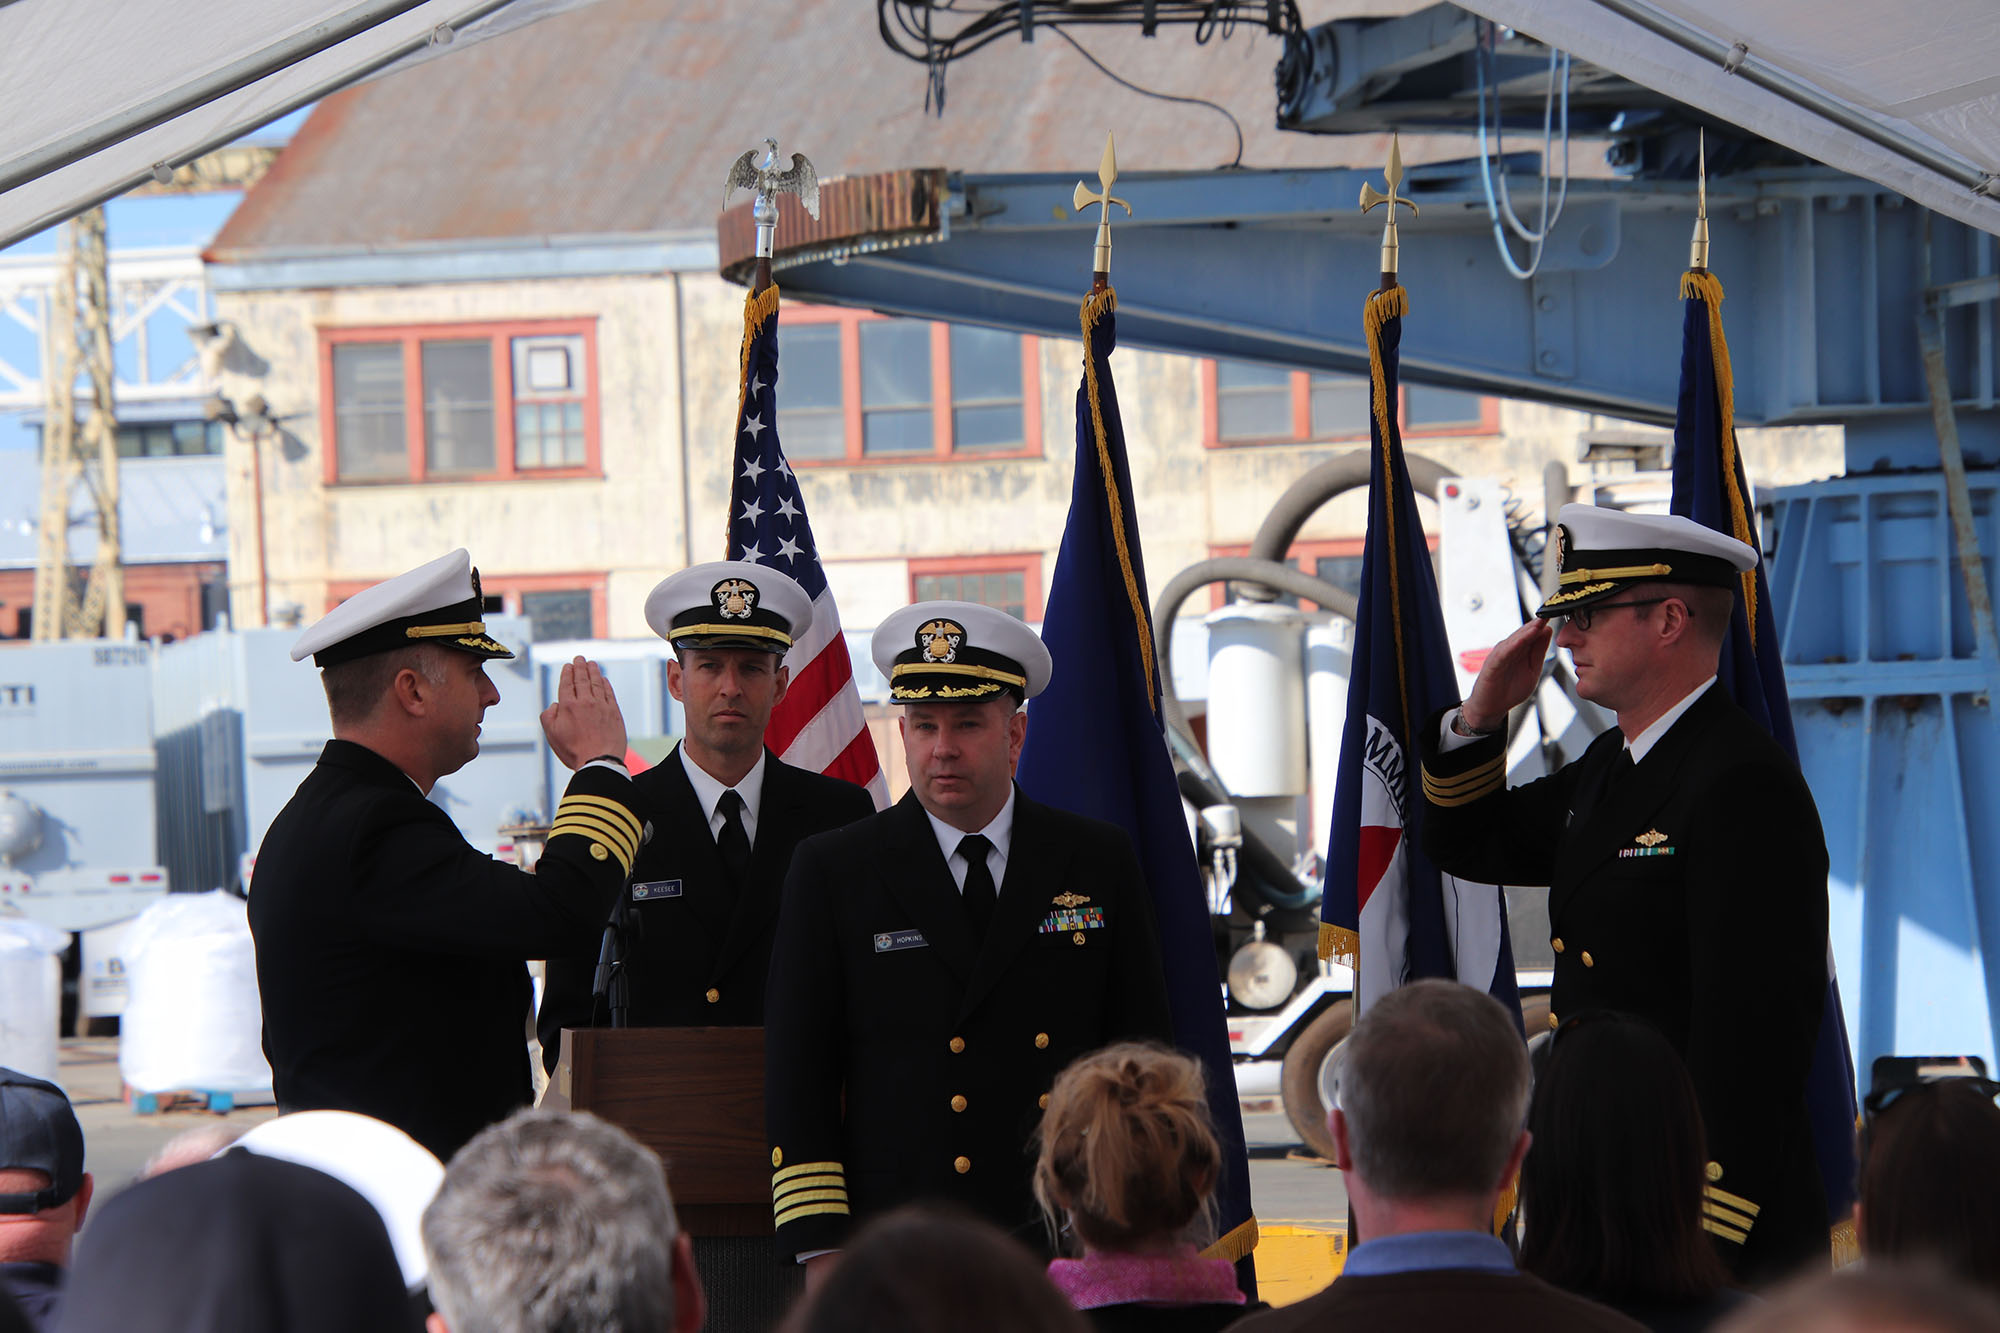 Lt. Cmdr. Justin Keesee, NOAA Ship Rainier executive officer and Capt. Michael Hopkins lead the change of command in Valejo, California.